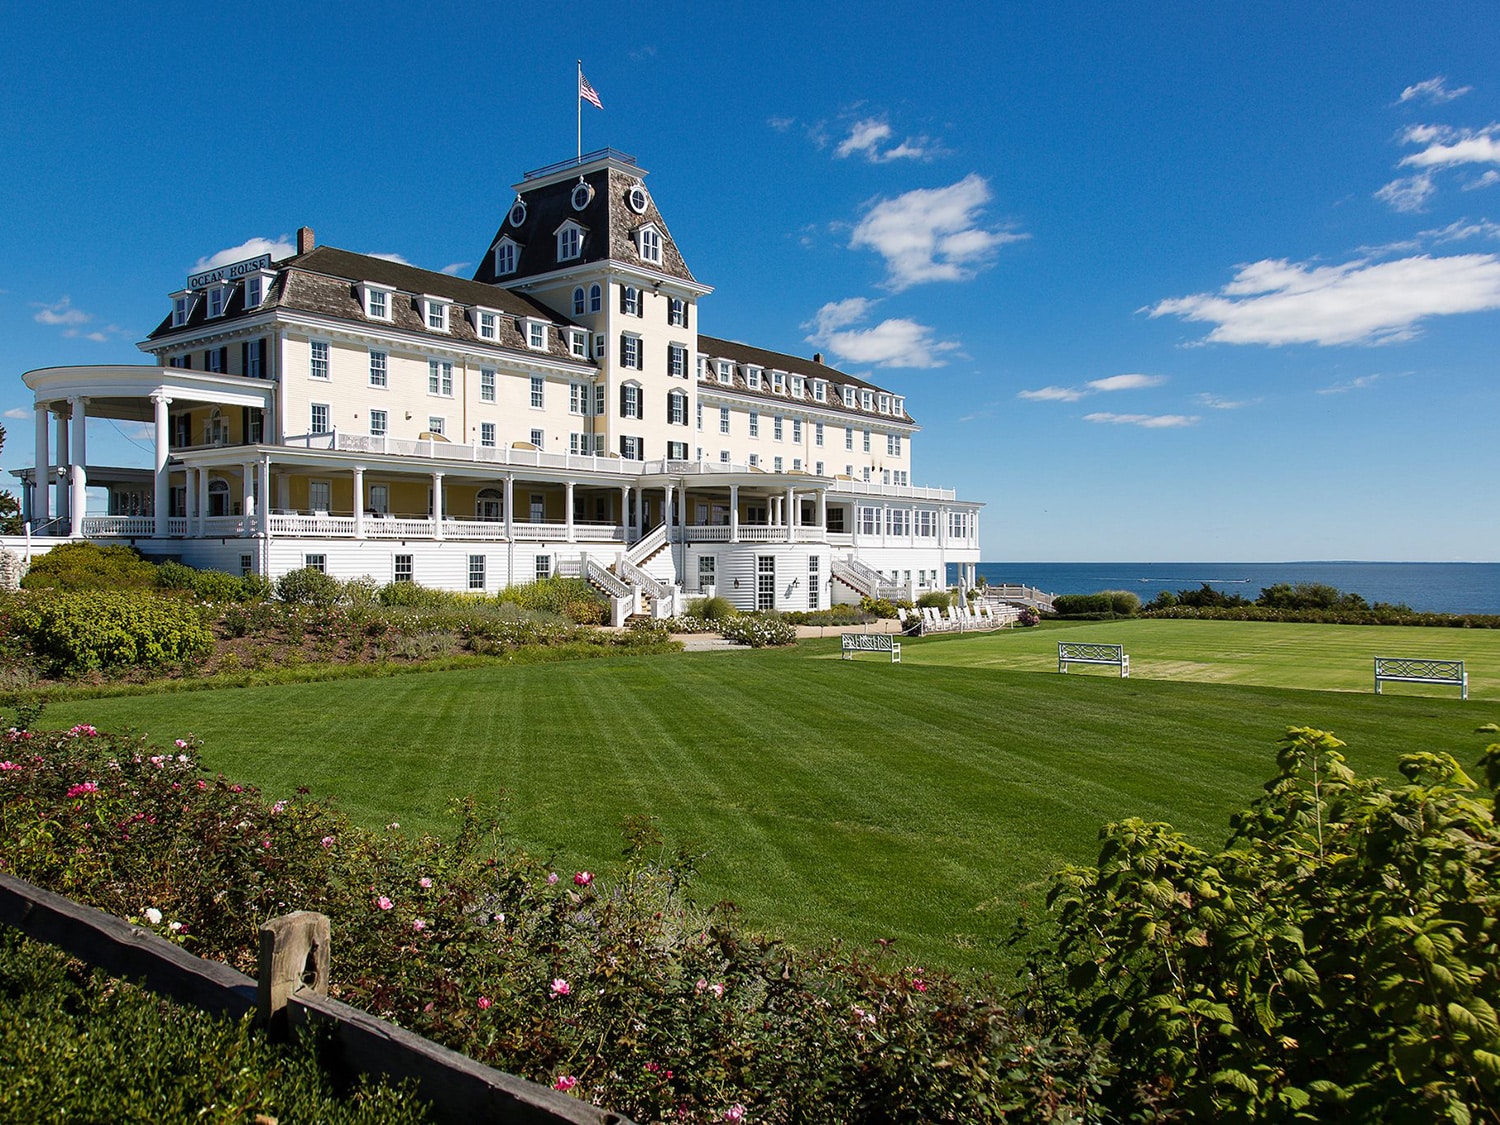 The exterior of the Ocean House hotel located in Watch Hill, Rhode Island.